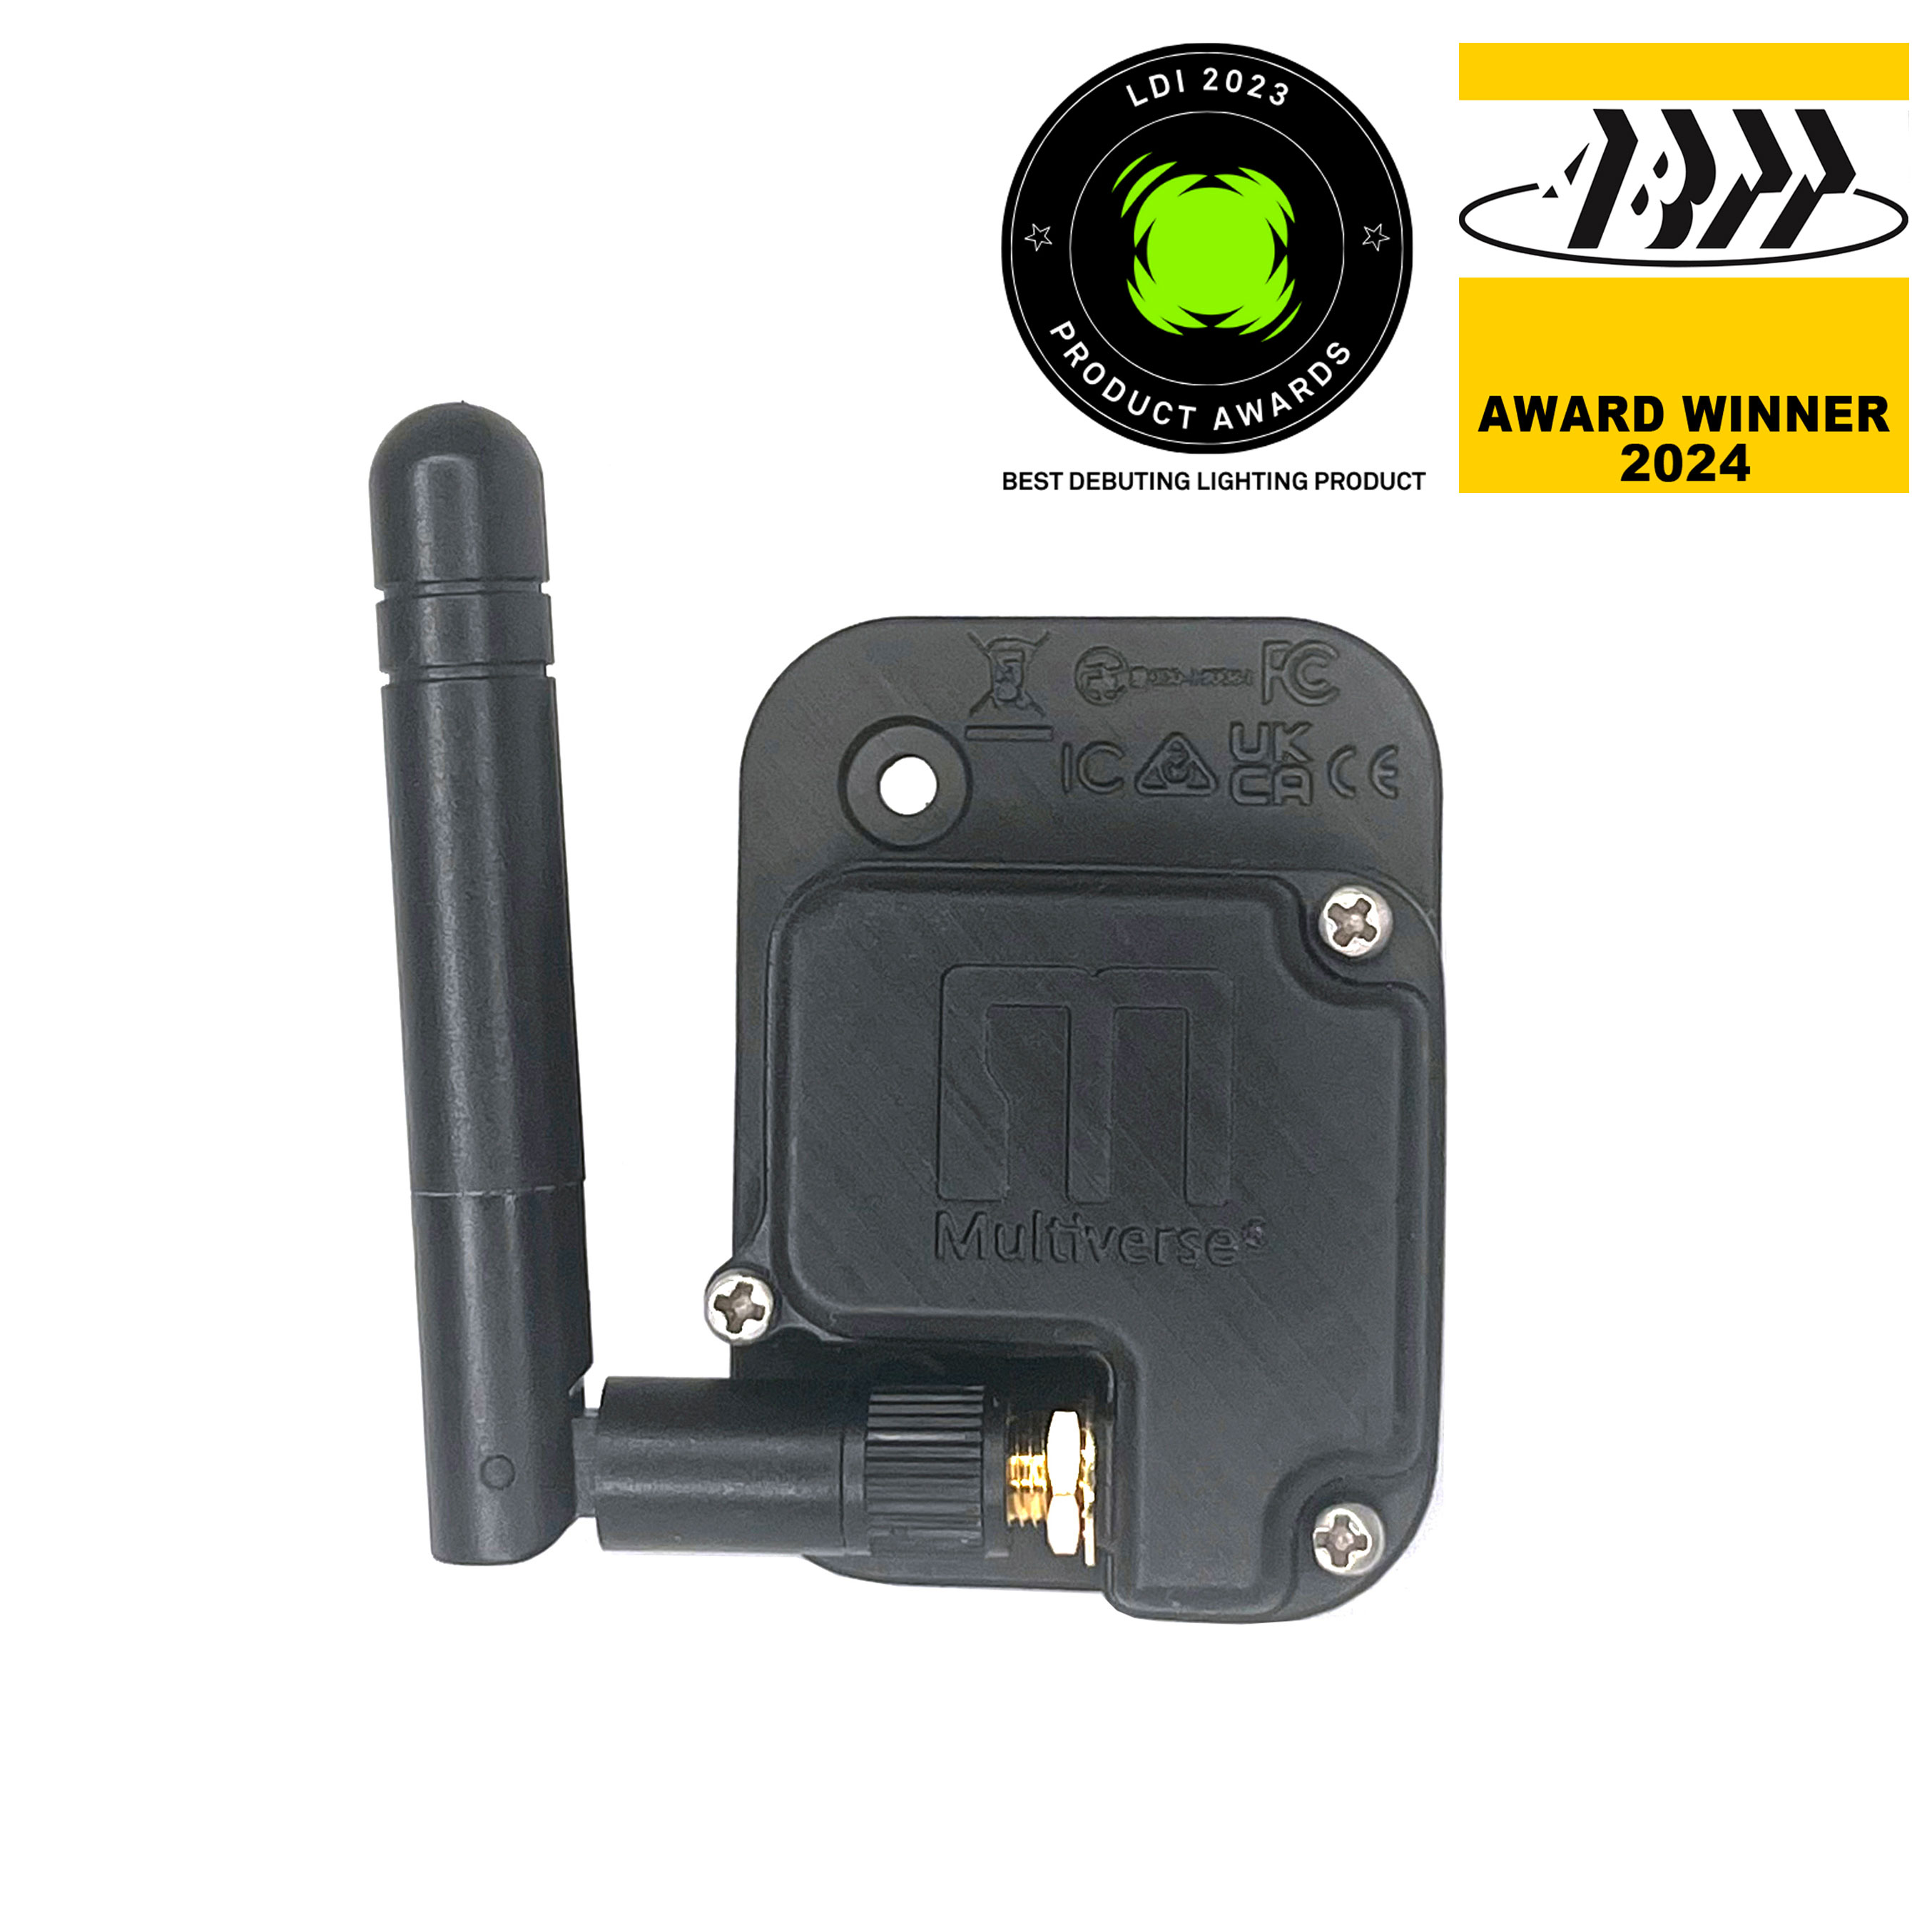 5914 Multiverse Connect Module, 2.4GHz - Winner of the ABTT Lighting Product of the Year 2024 and LDI Show 2023 Lighting Award, Controls Category